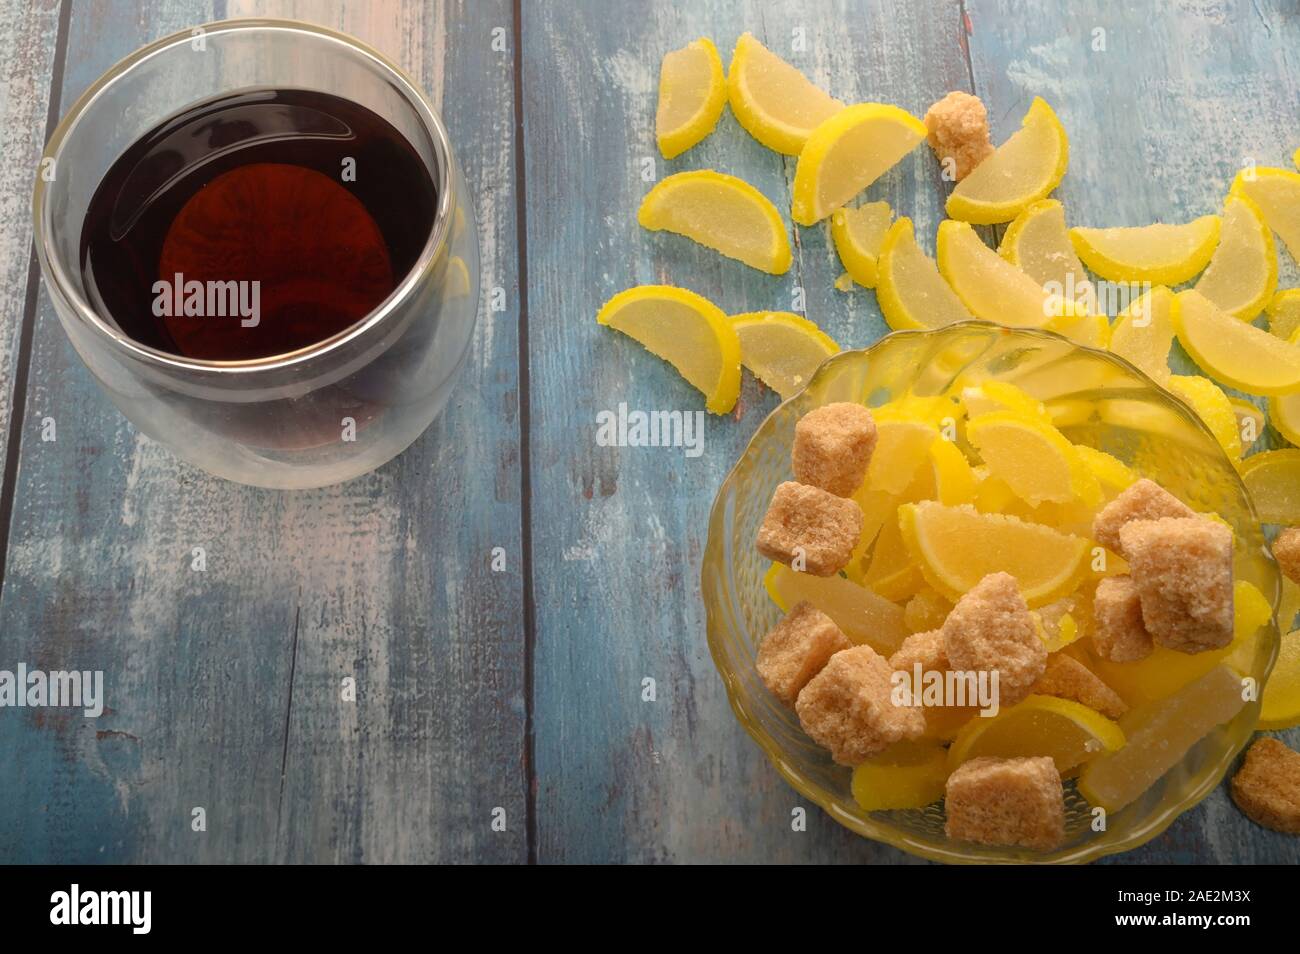 Marmalade lemon slices, pieces of brown sugar and a glass of black tea on a wooden background. Sweet dessert. Close up Stock Photo